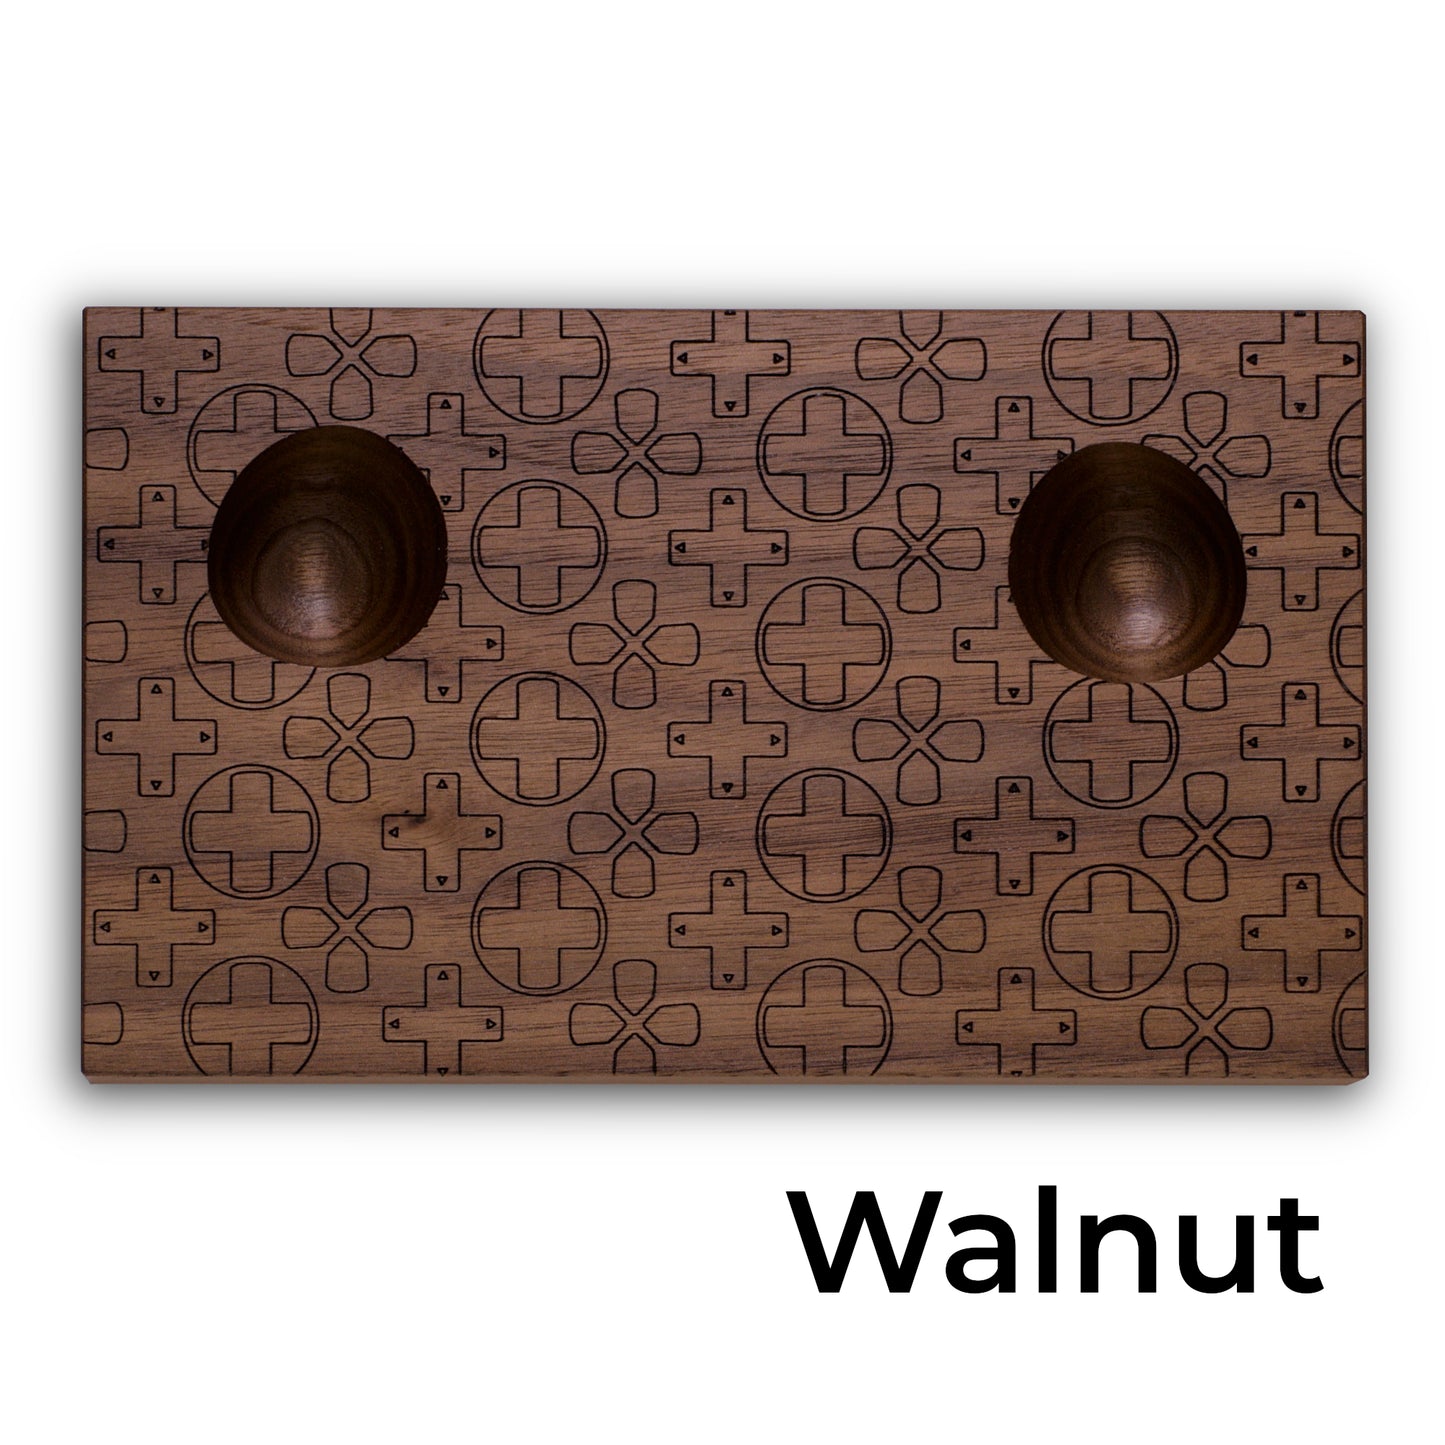 Wooden stand with d-pad design in walnut for Nintendo switch pro controller